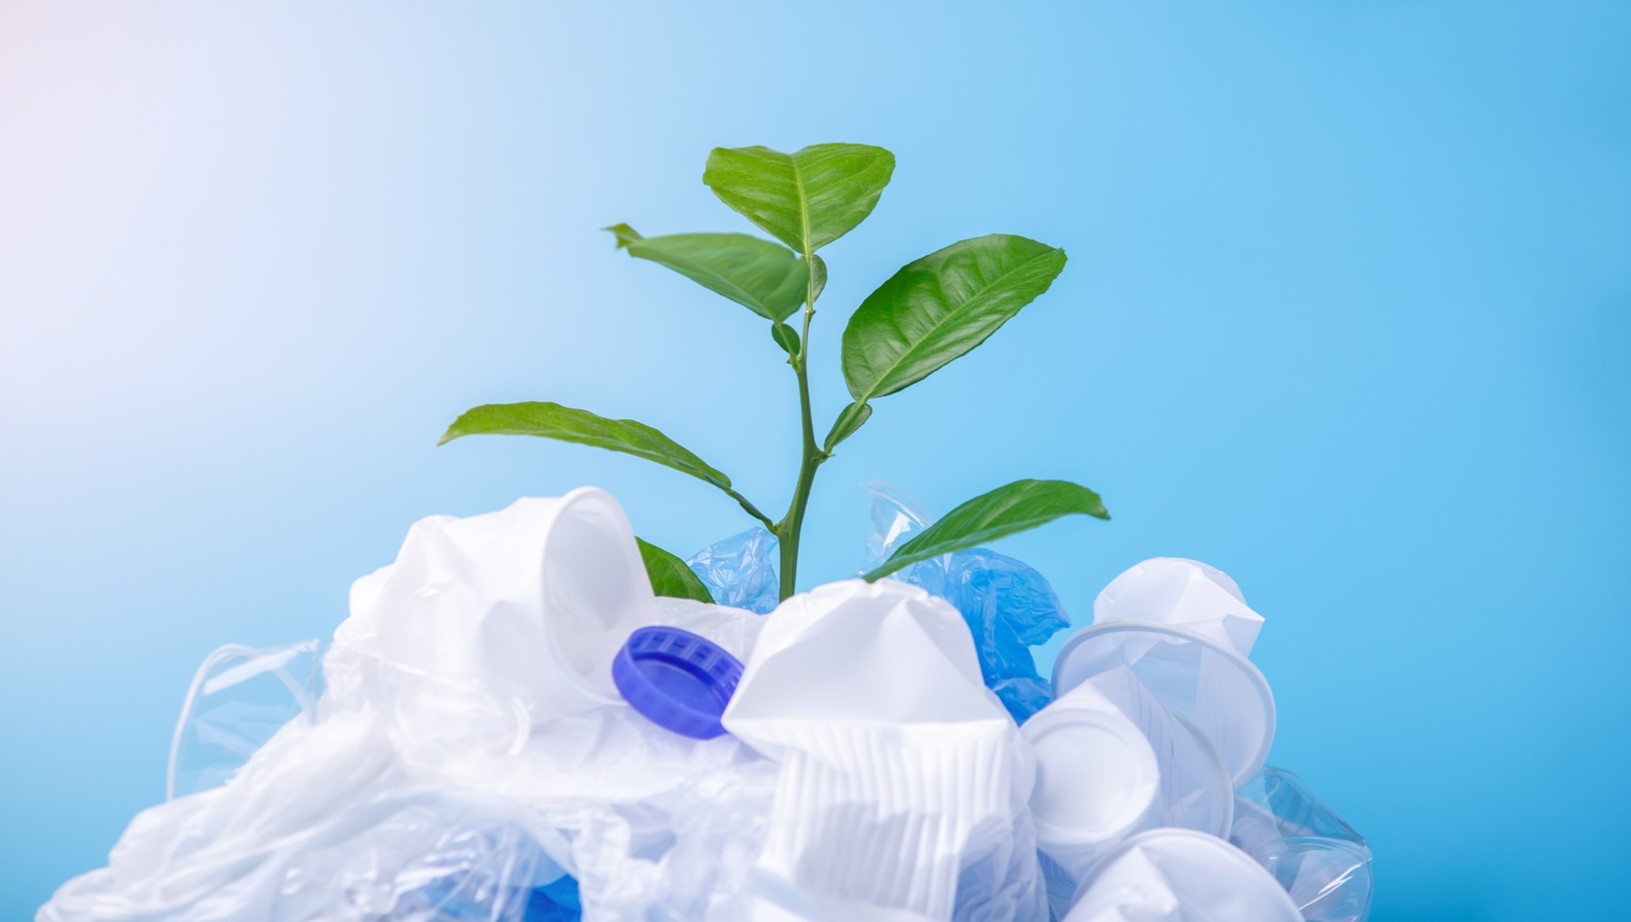 Green plant growing over a mountain of plastics